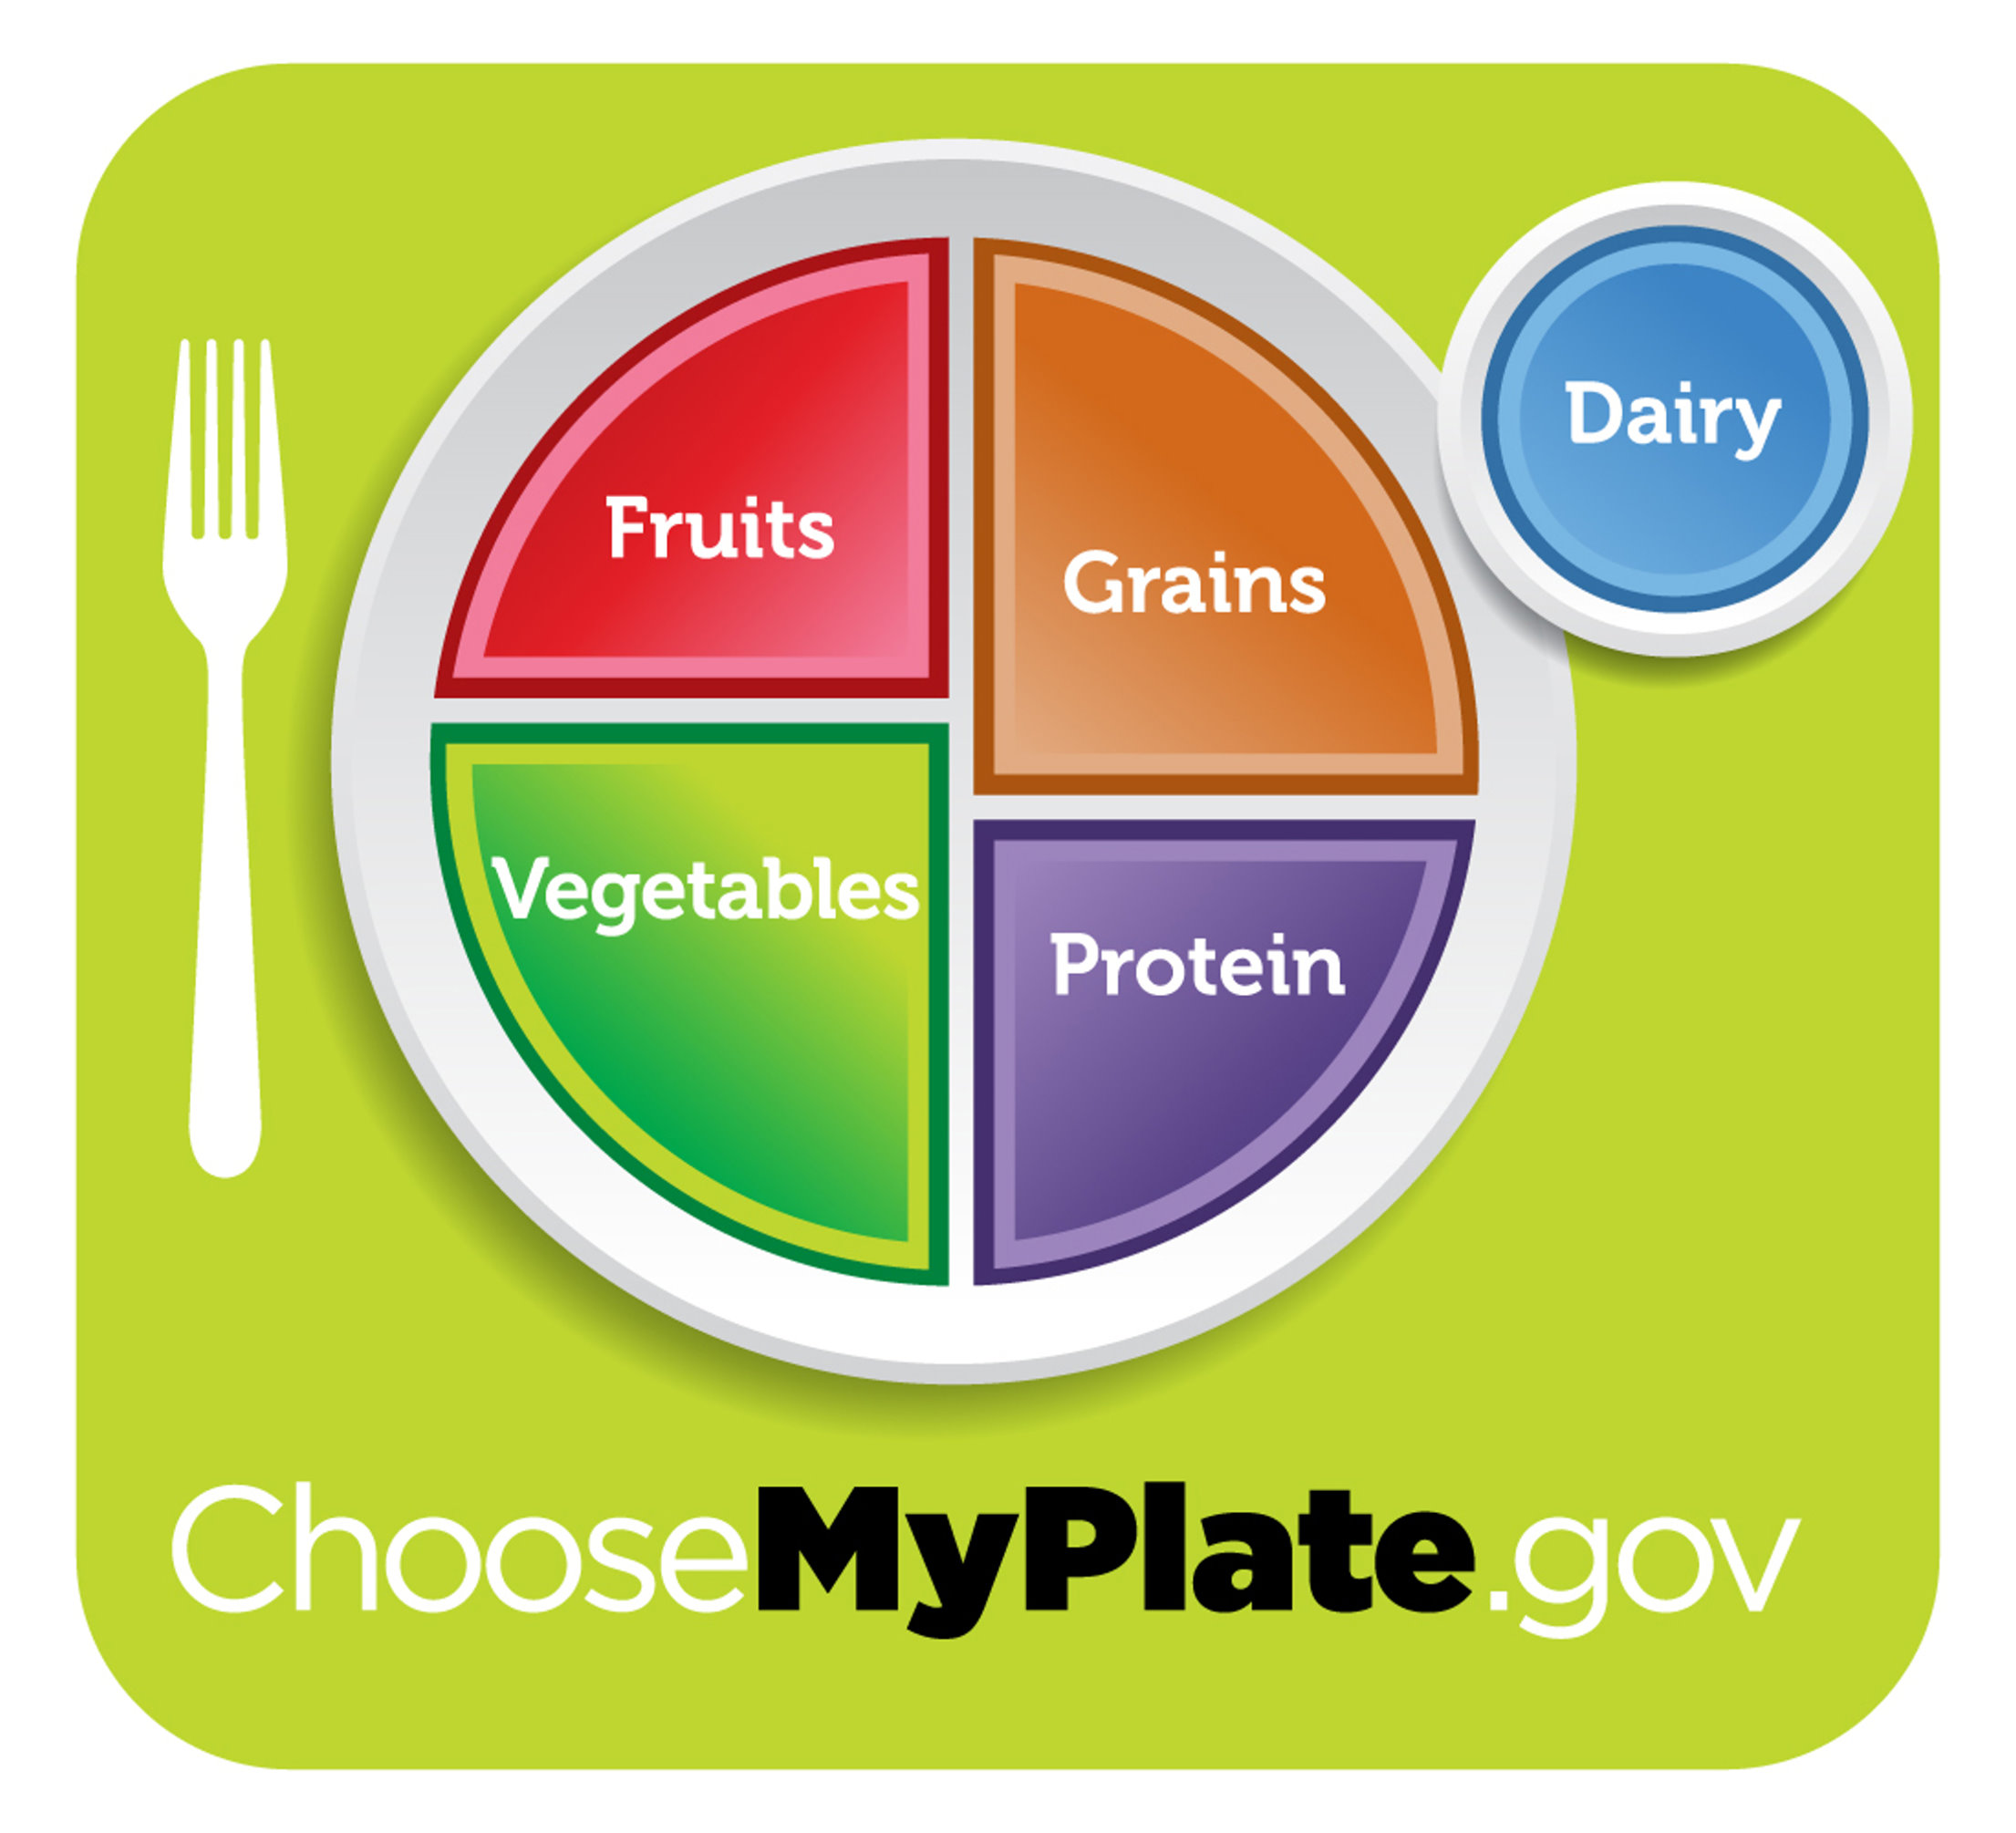 USDA releases new dietary guidelines and replaces the food pyramid